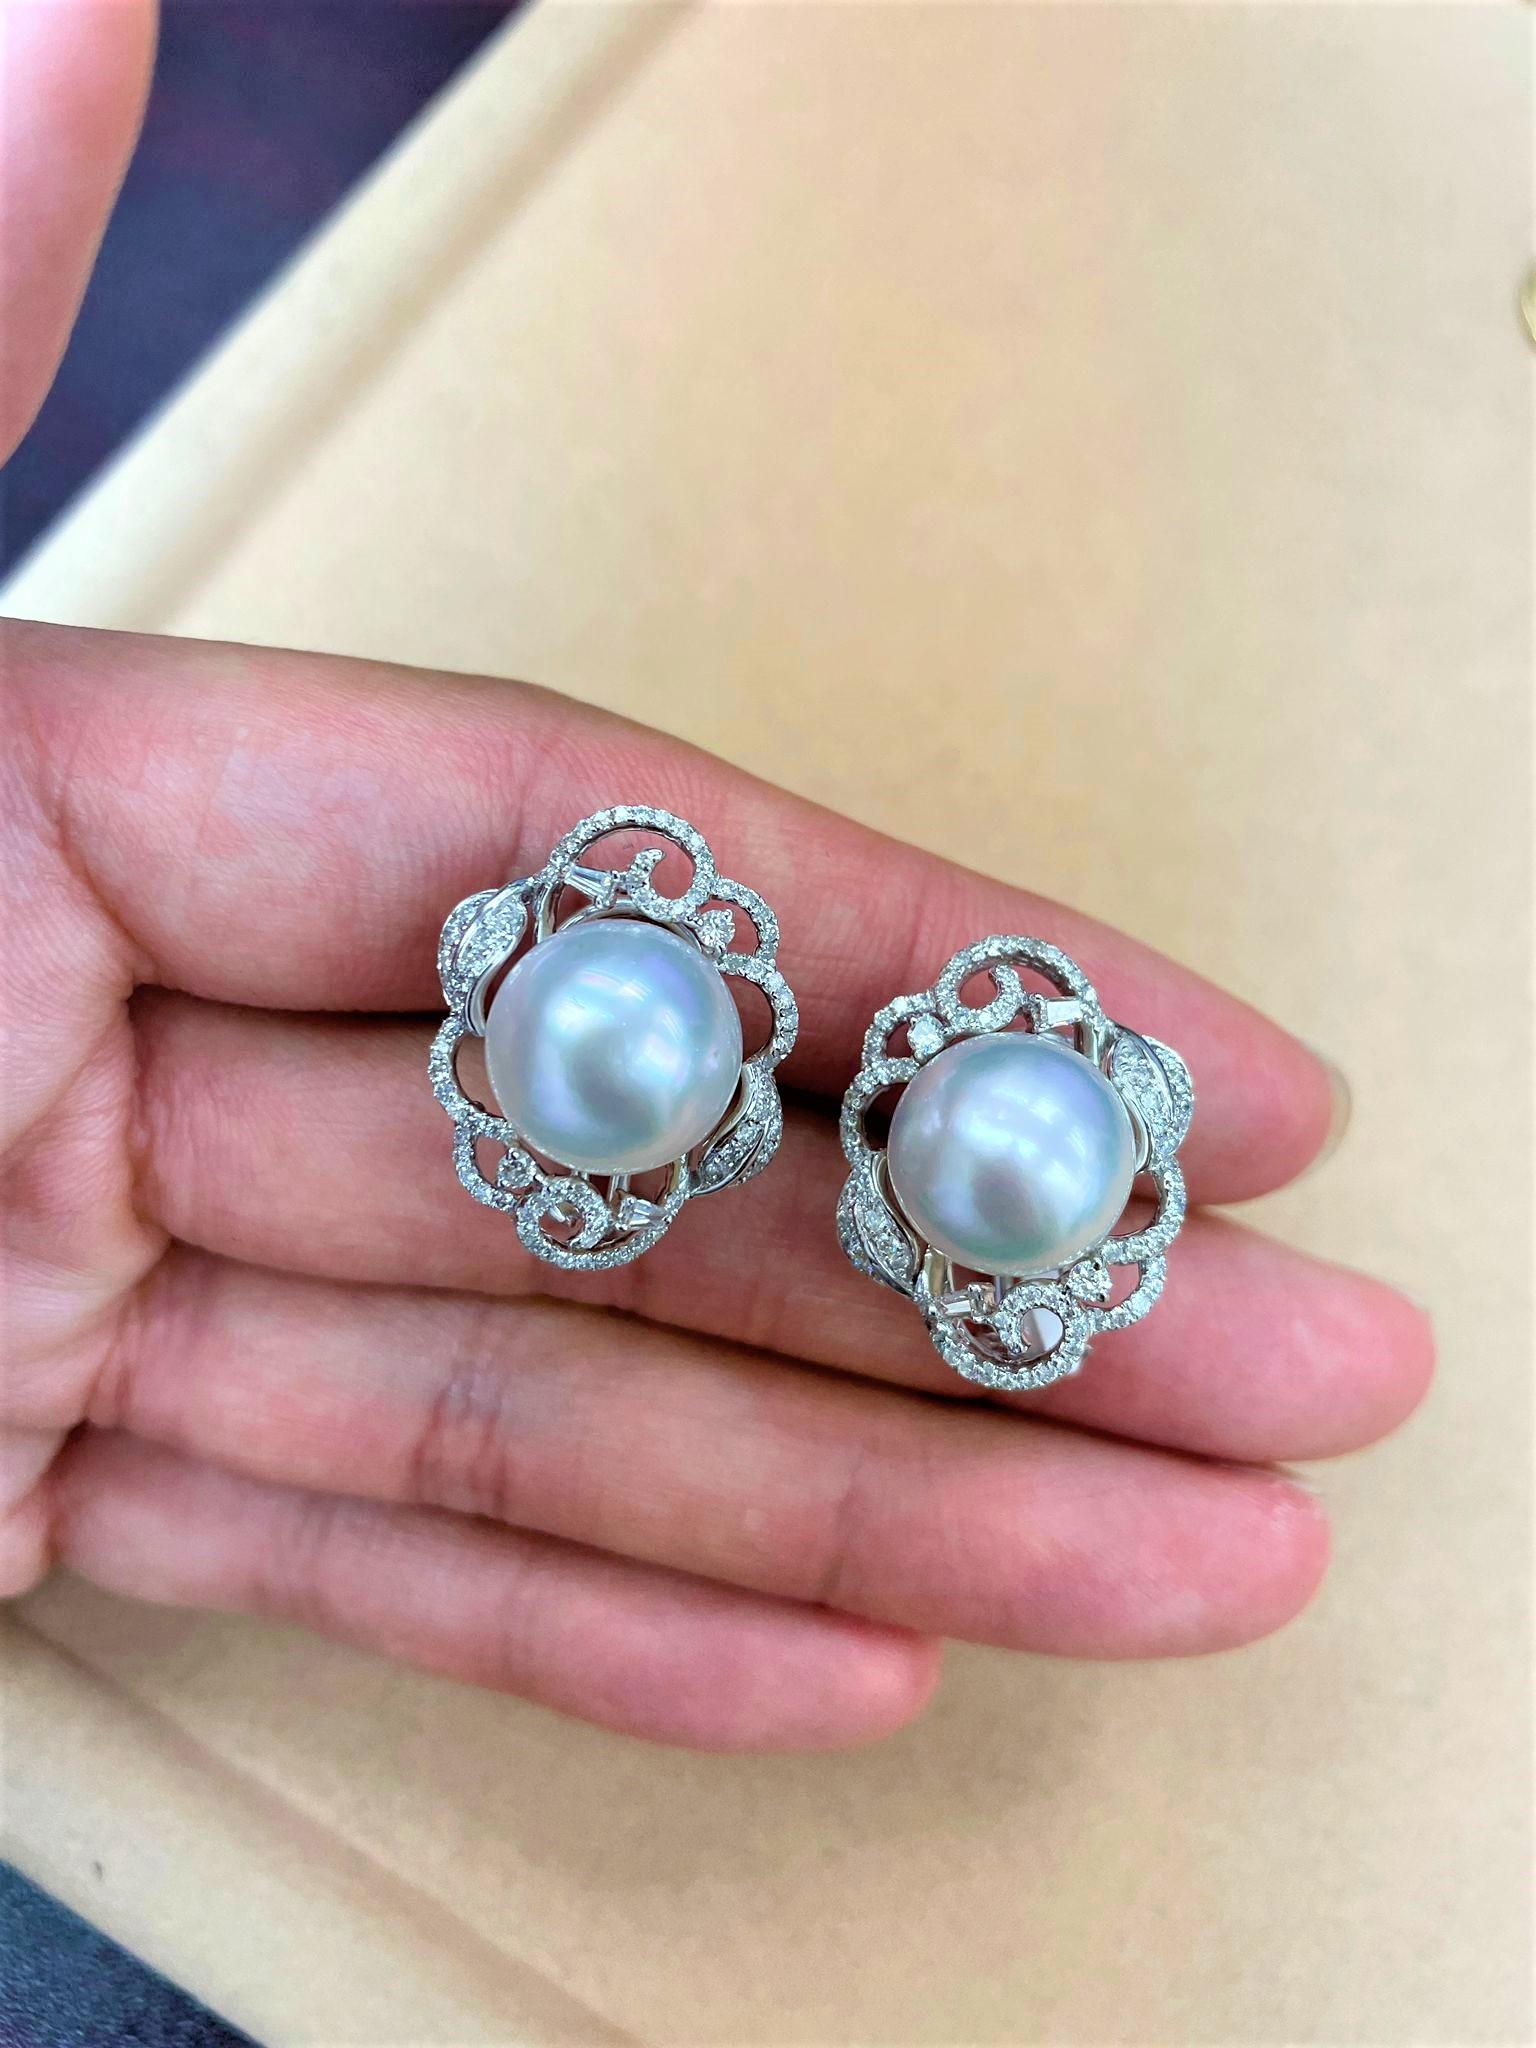 The Following Items we are offering are these Extremely Rare Beautiful 18KT White Gold Fine Large South Sea White Pearl Earrings comprised of Fine Glittering Fancy Tapered and Round White Diamonds in the form of Floral Petals!! These Extremely Rare